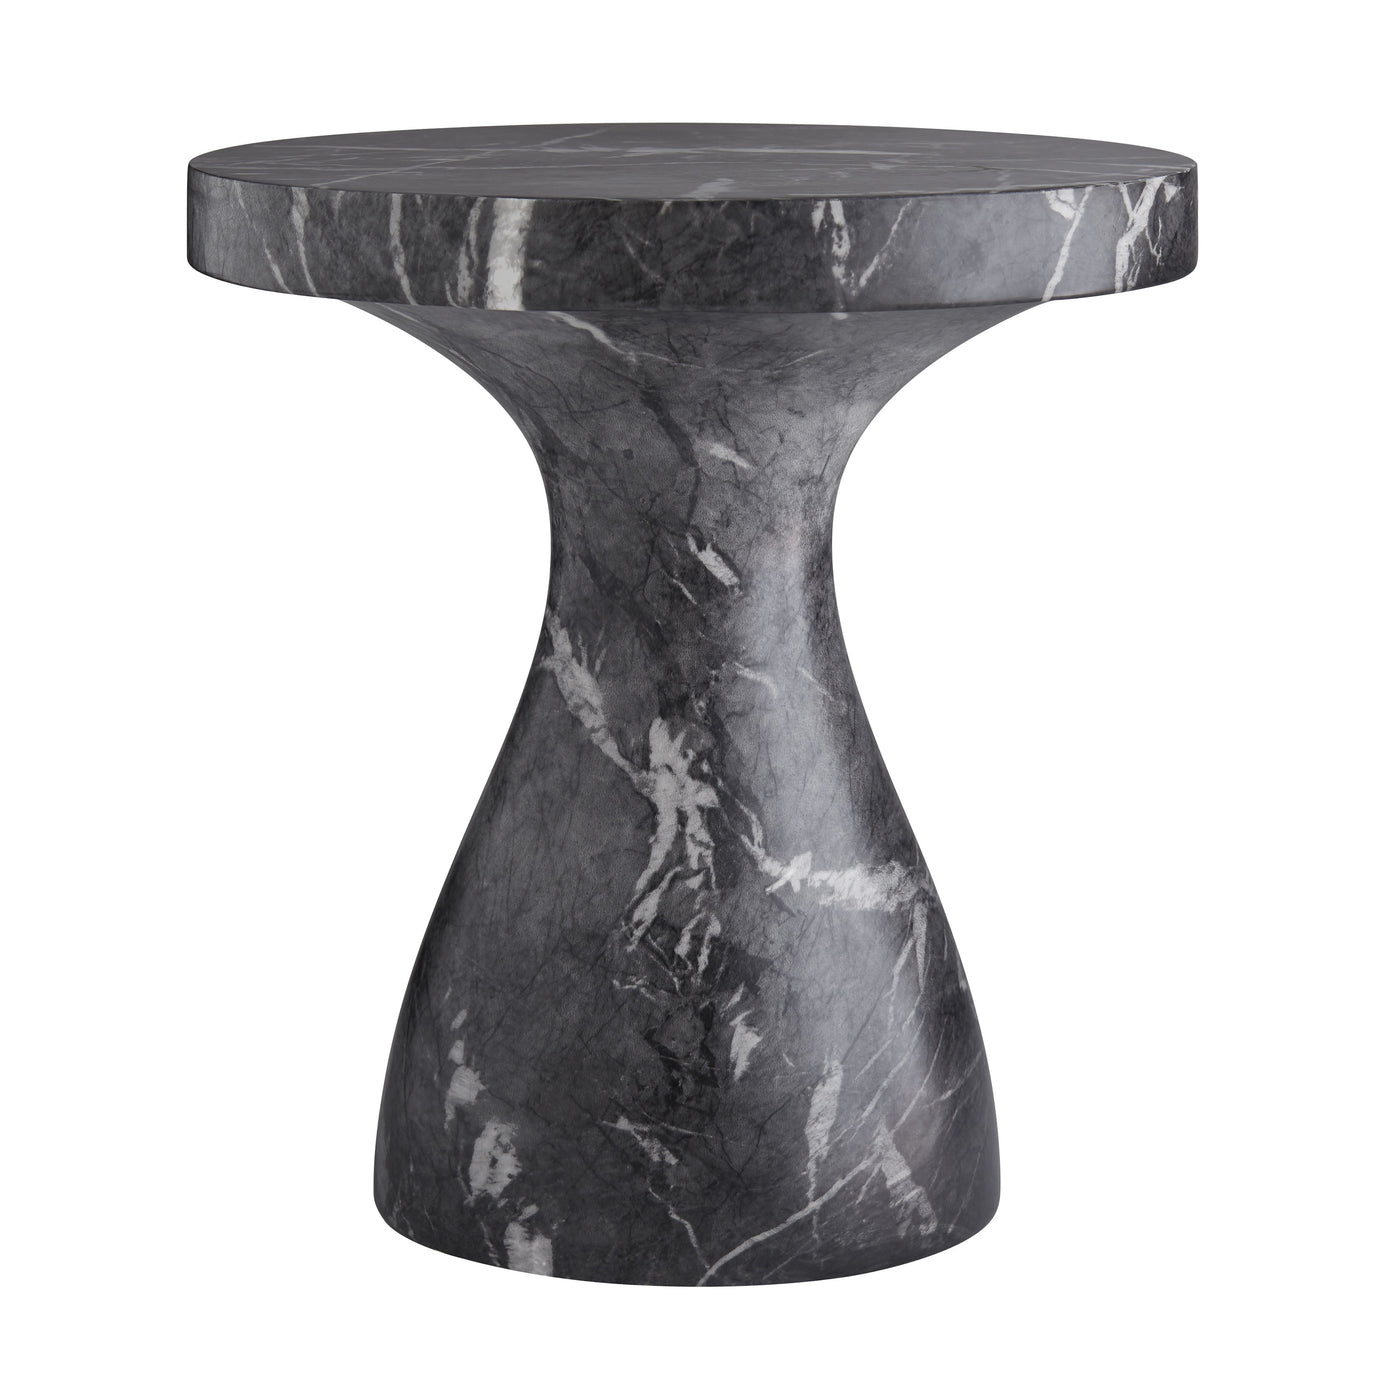 ACCENT TABLE CONCRETE LARGE (Available in 2 Colors)